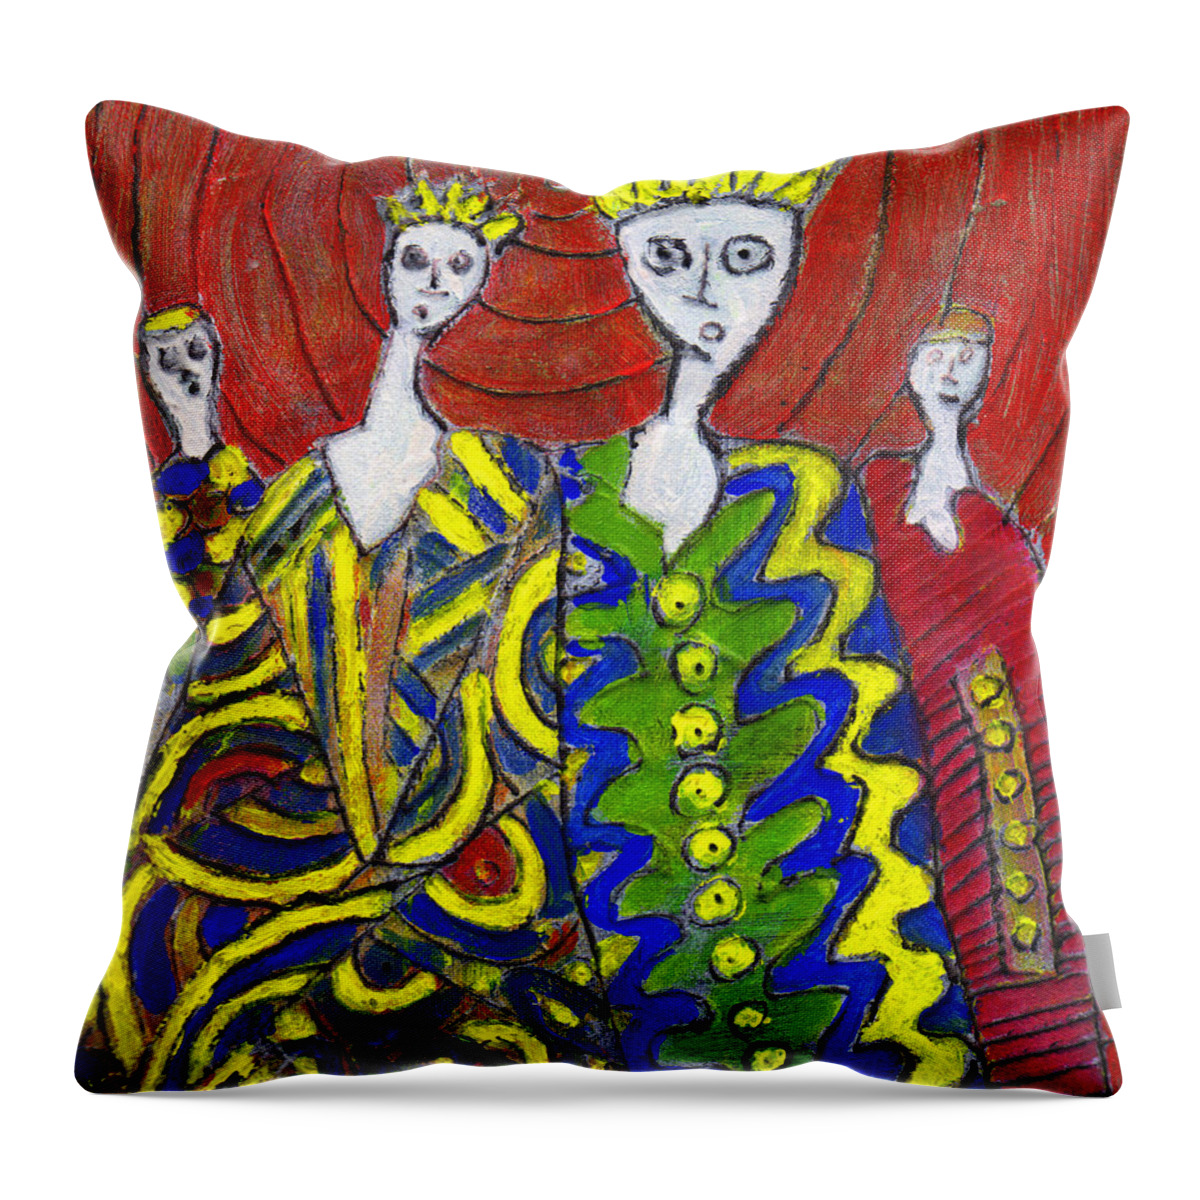 Abstract Throw Pillow featuring the painting The Royal Sisters by Wayne Potrafka